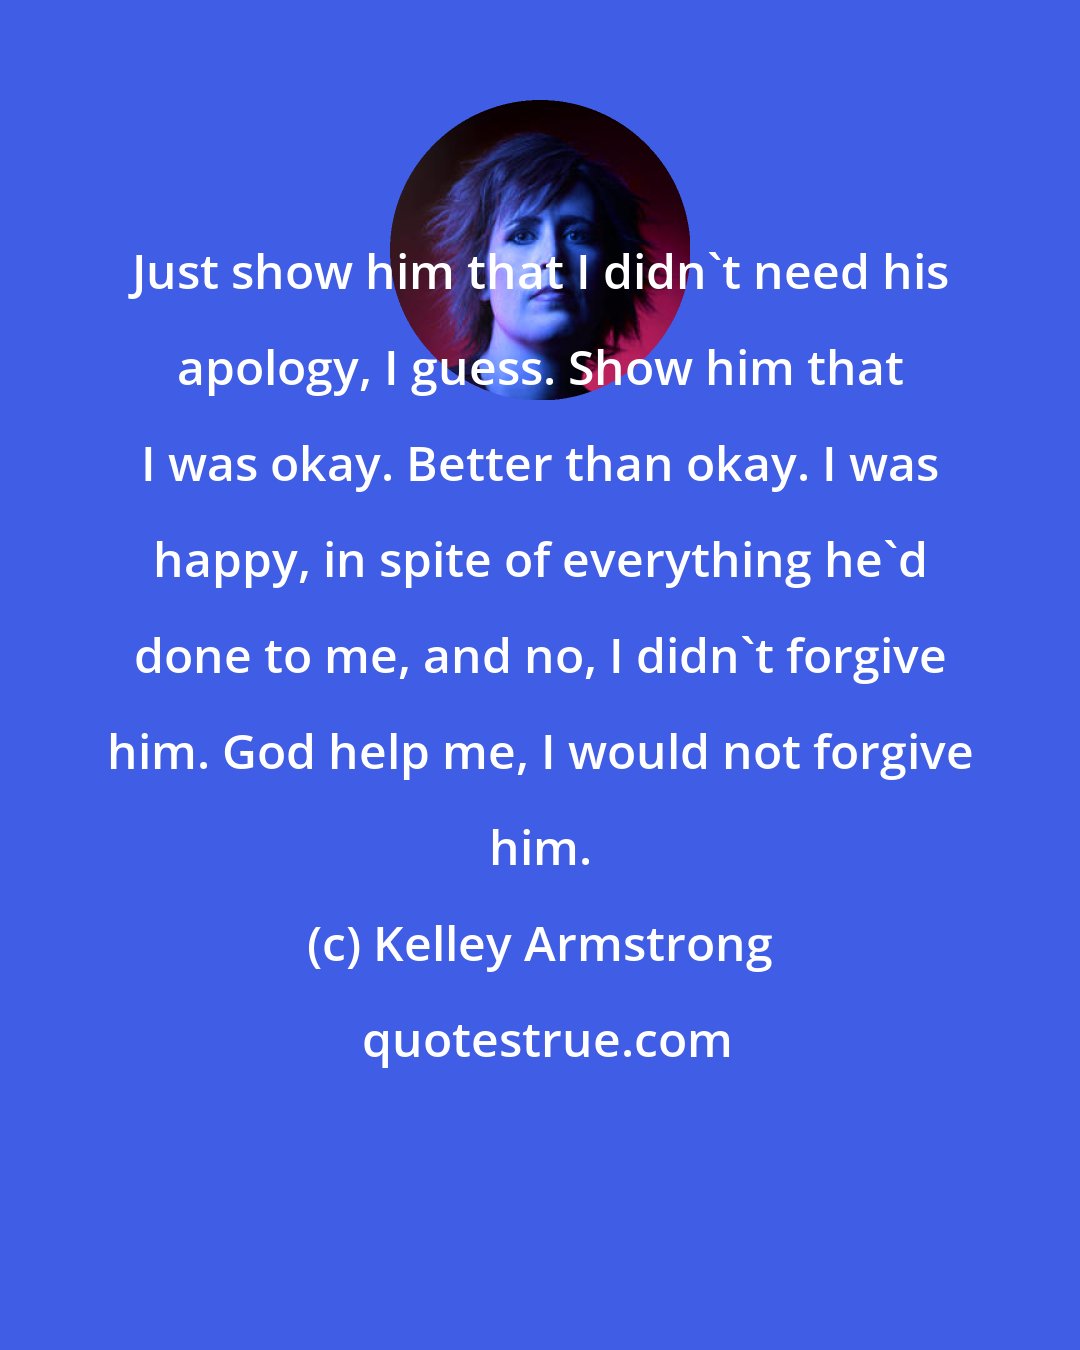 Kelley Armstrong: Just show him that I didn't need his apology, I guess. Show him that I was okay. Better than okay. I was happy, in spite of everything he'd done to me, and no, I didn't forgive him. God help me, I would not forgive him.